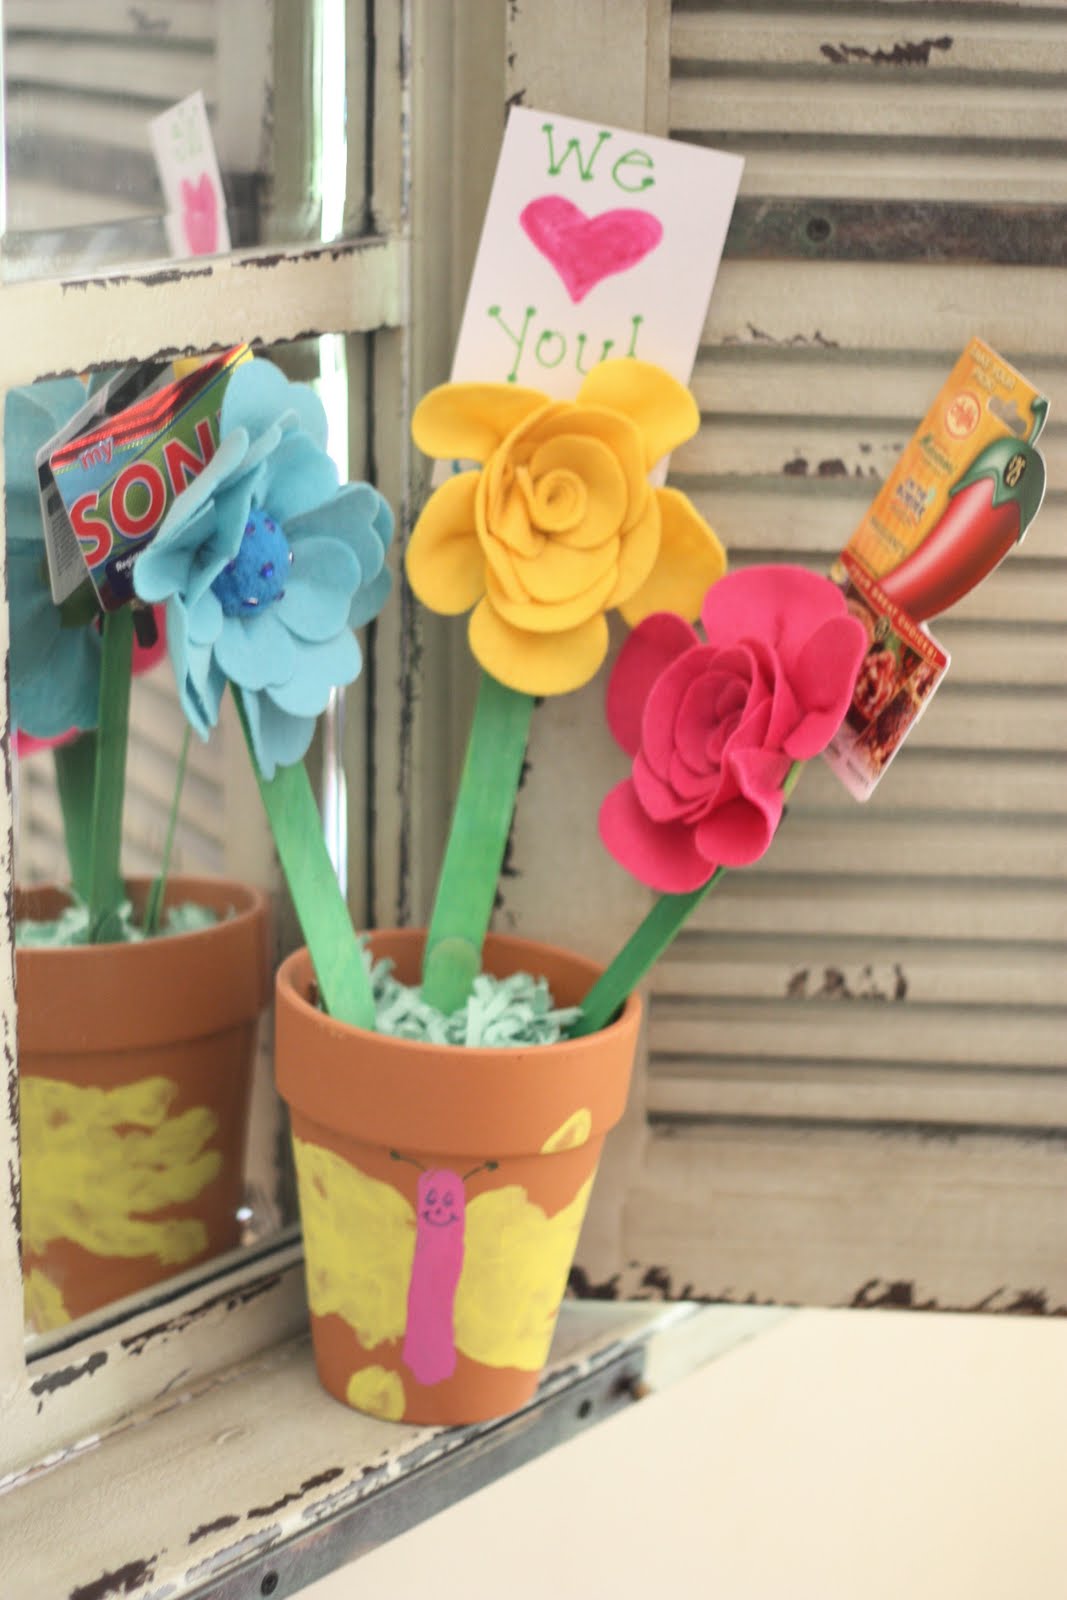 Gift Card Bouquet for Mother's Day! - I Can Teach My Child!